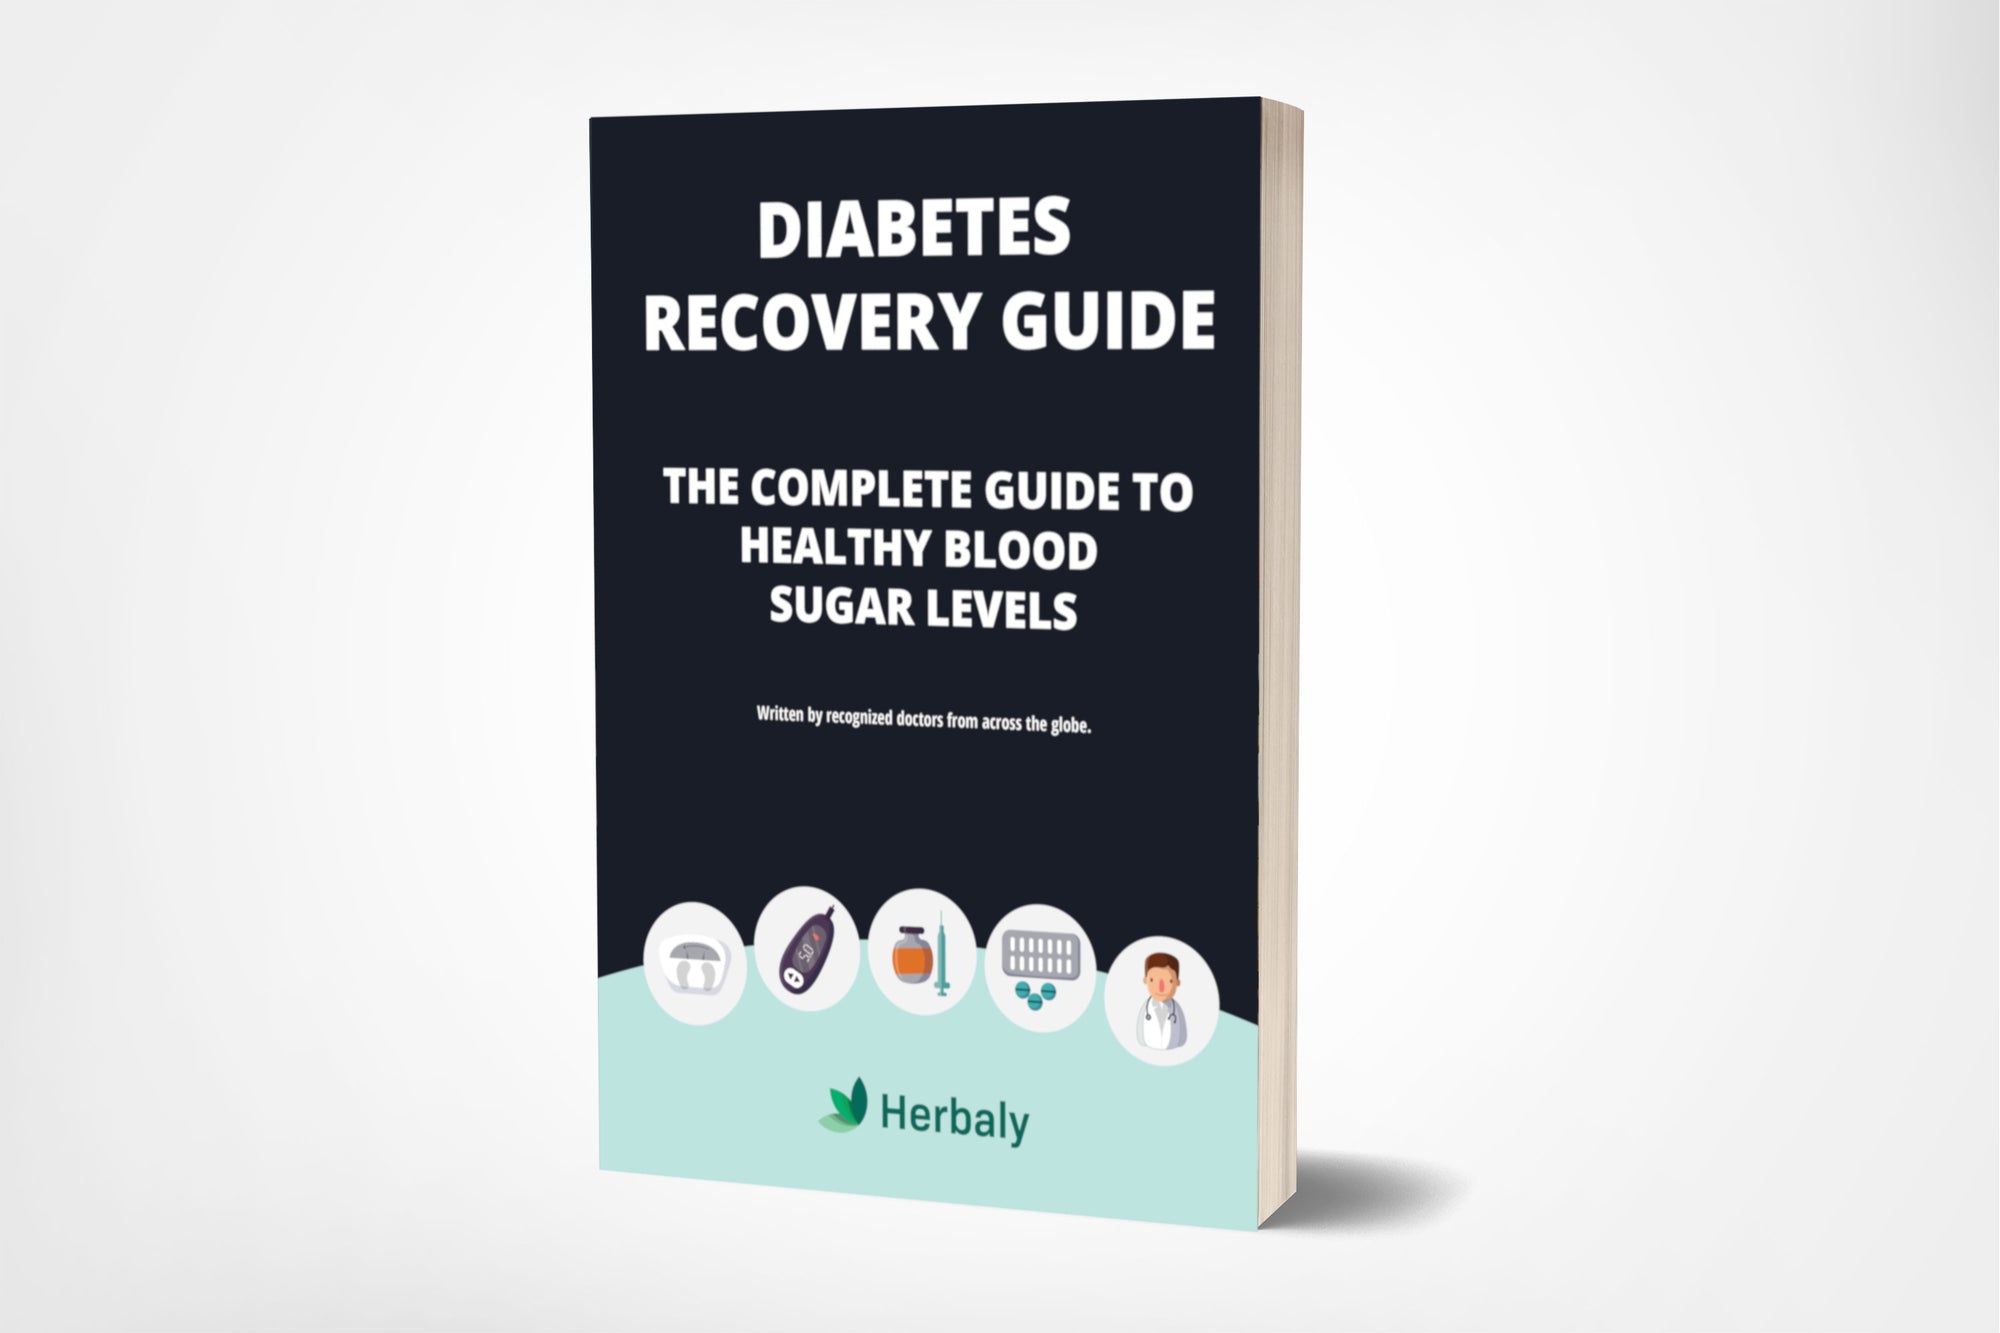 Diabetes Recovery Guide by Herbaly